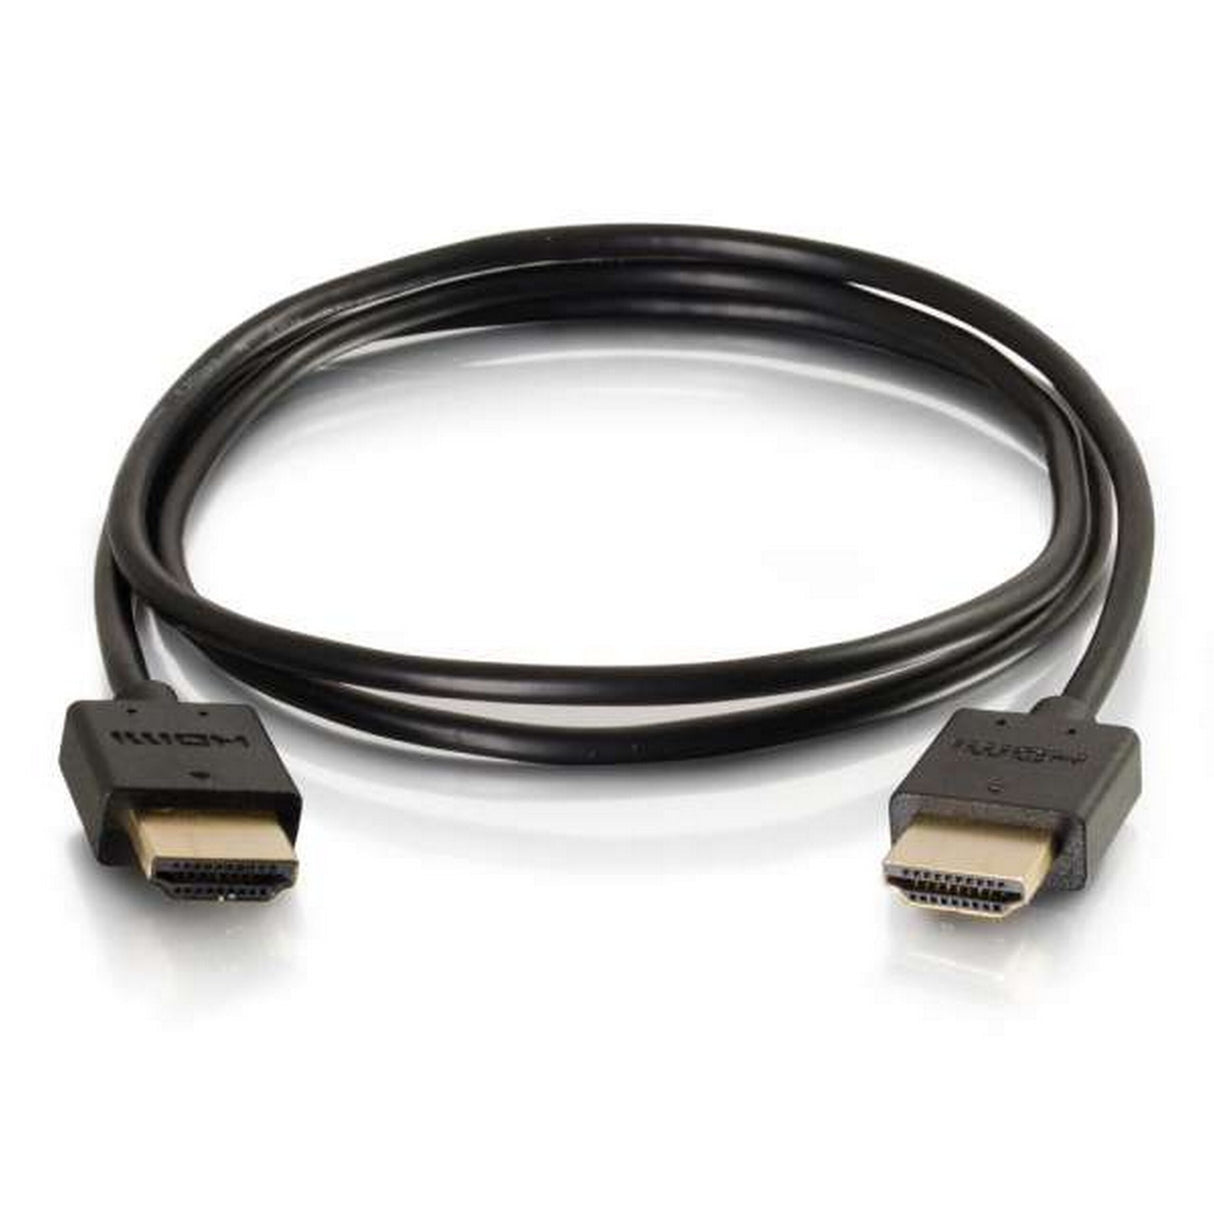 C2G 60Hz Ultra Flexible High Speed HDMI Cable with Low Profile Connectors, 6 Foot